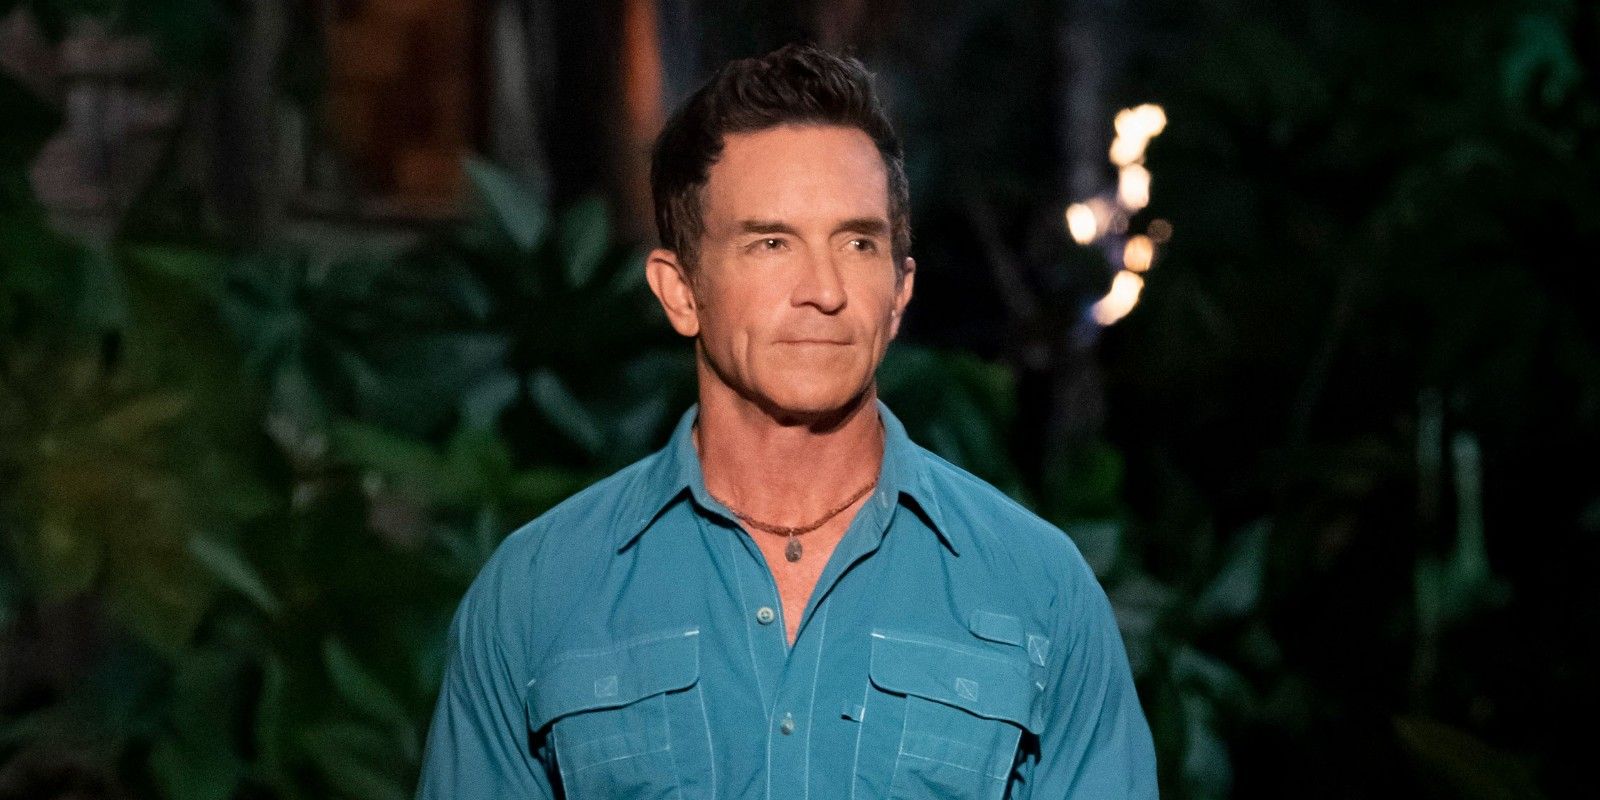 Survivor Jeff Probst wearing blue shirt serious expression at tribal council